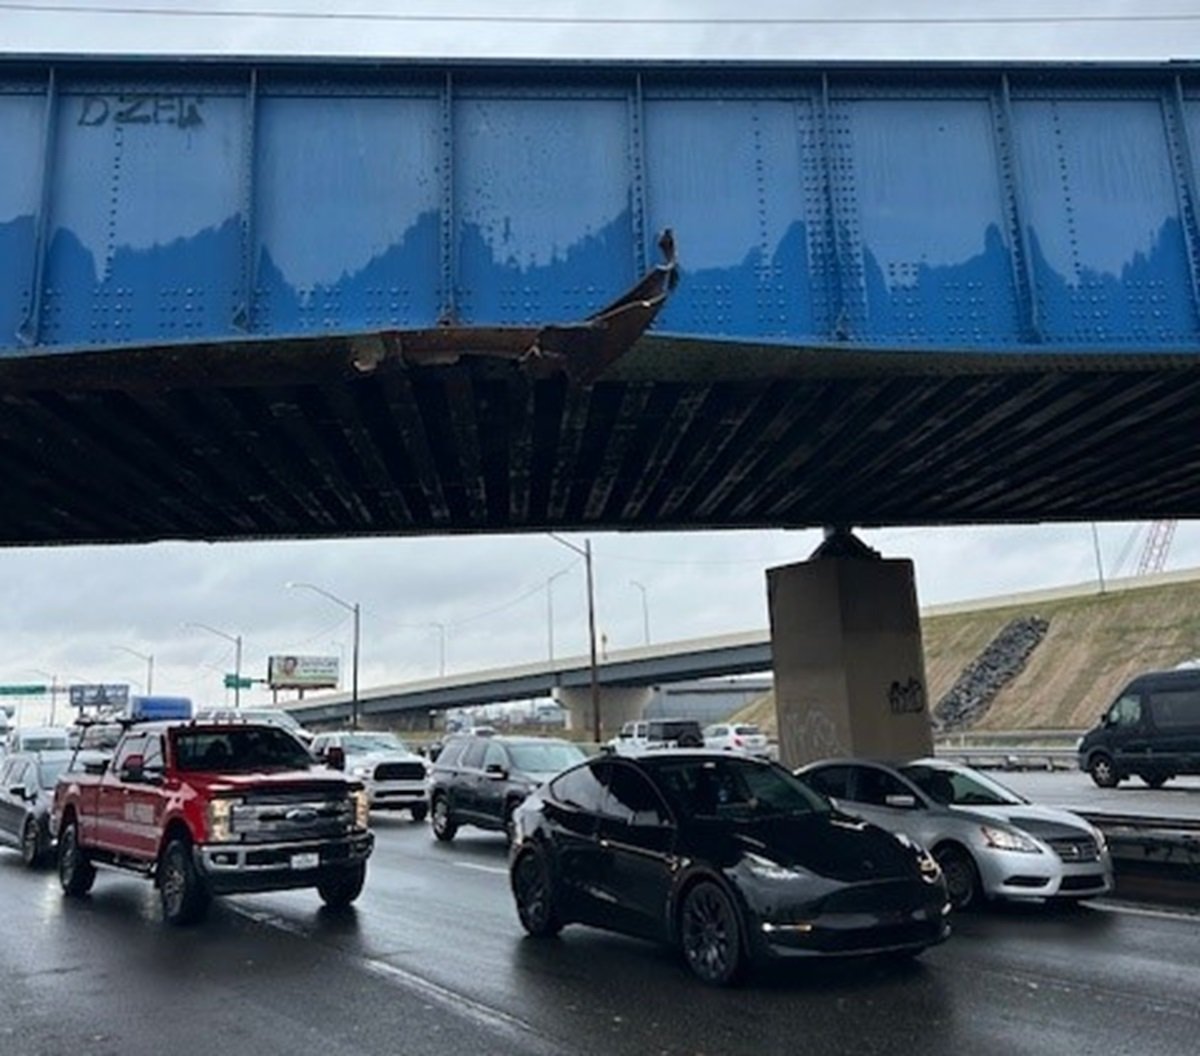 I 95 Philadelphia Accident Today: What Actually Happened There?